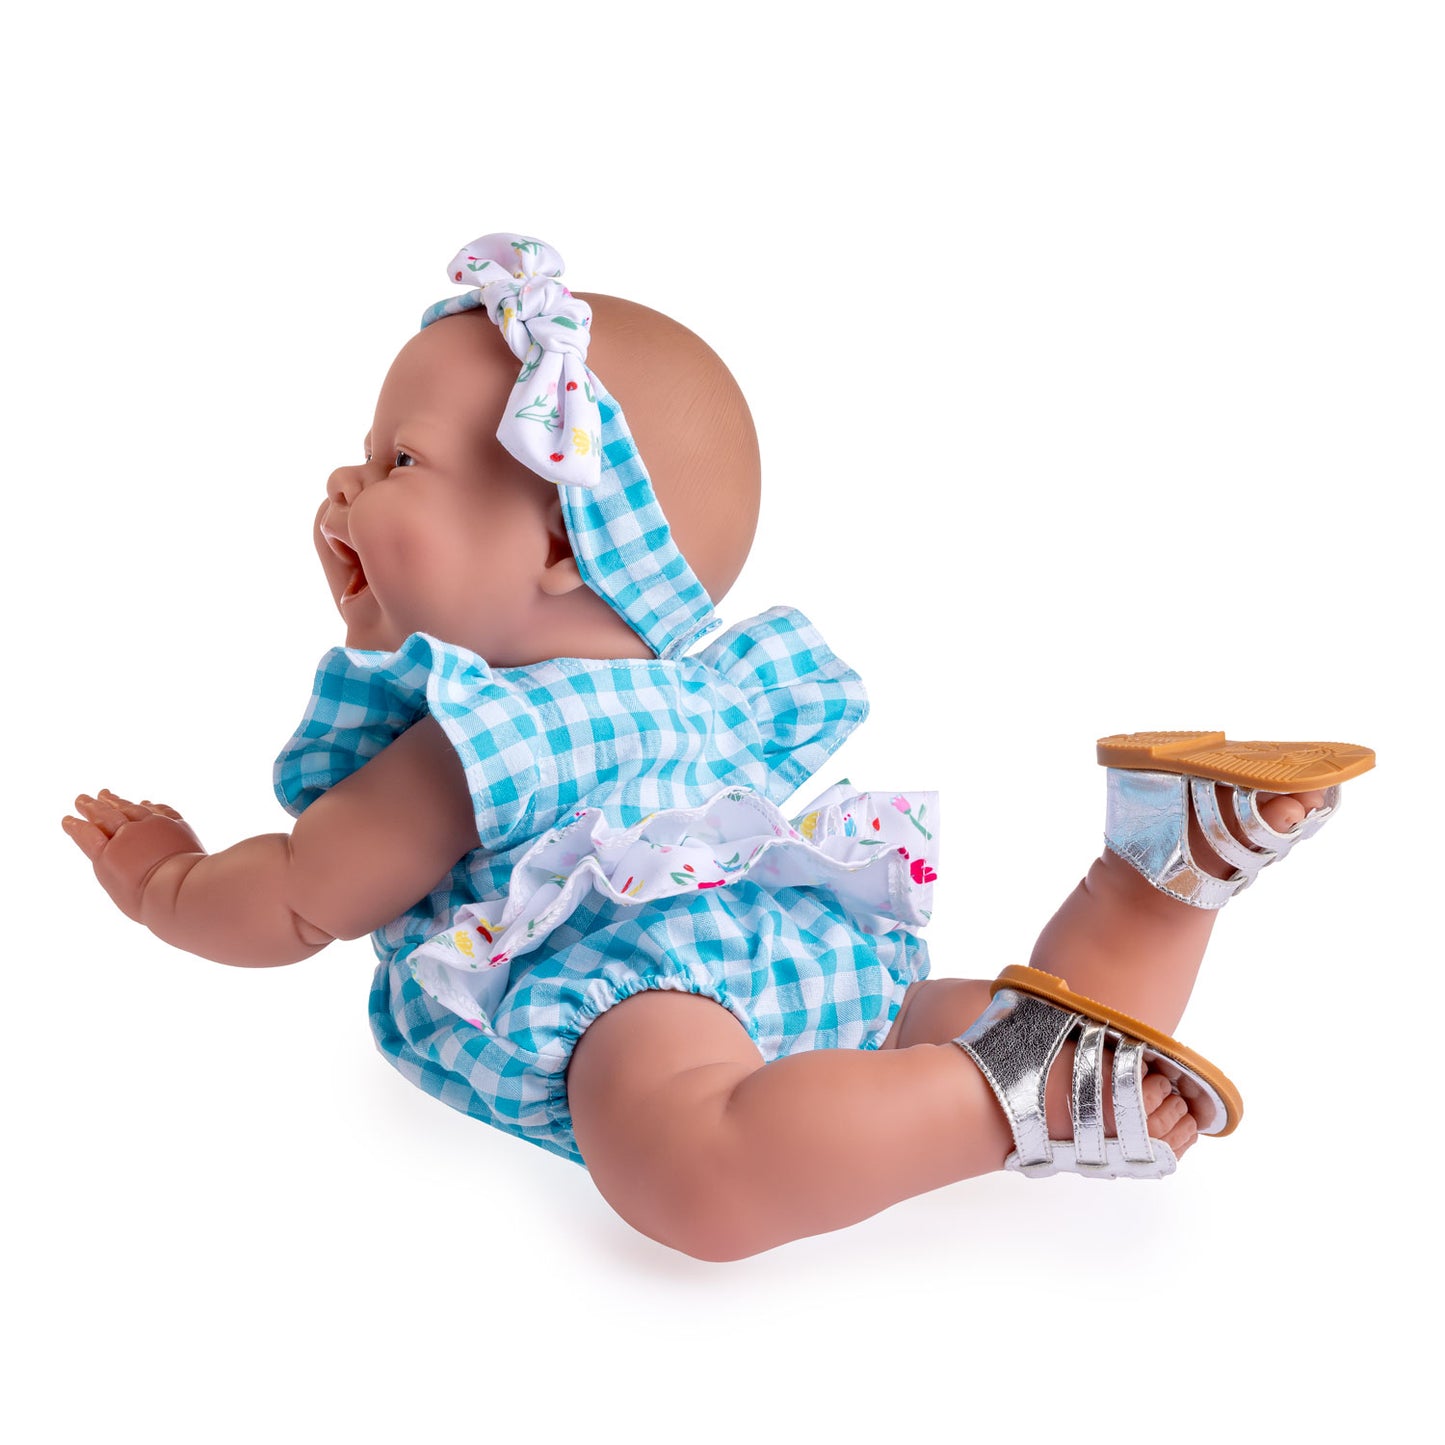 Lola on the go - 14” Realistic All Vinyl Posable Play Doll "REAL GIRL" – Happy Face- Dressed in 2 Piece Fun Collection Outfit with Shoes -By Berenguer Boutique